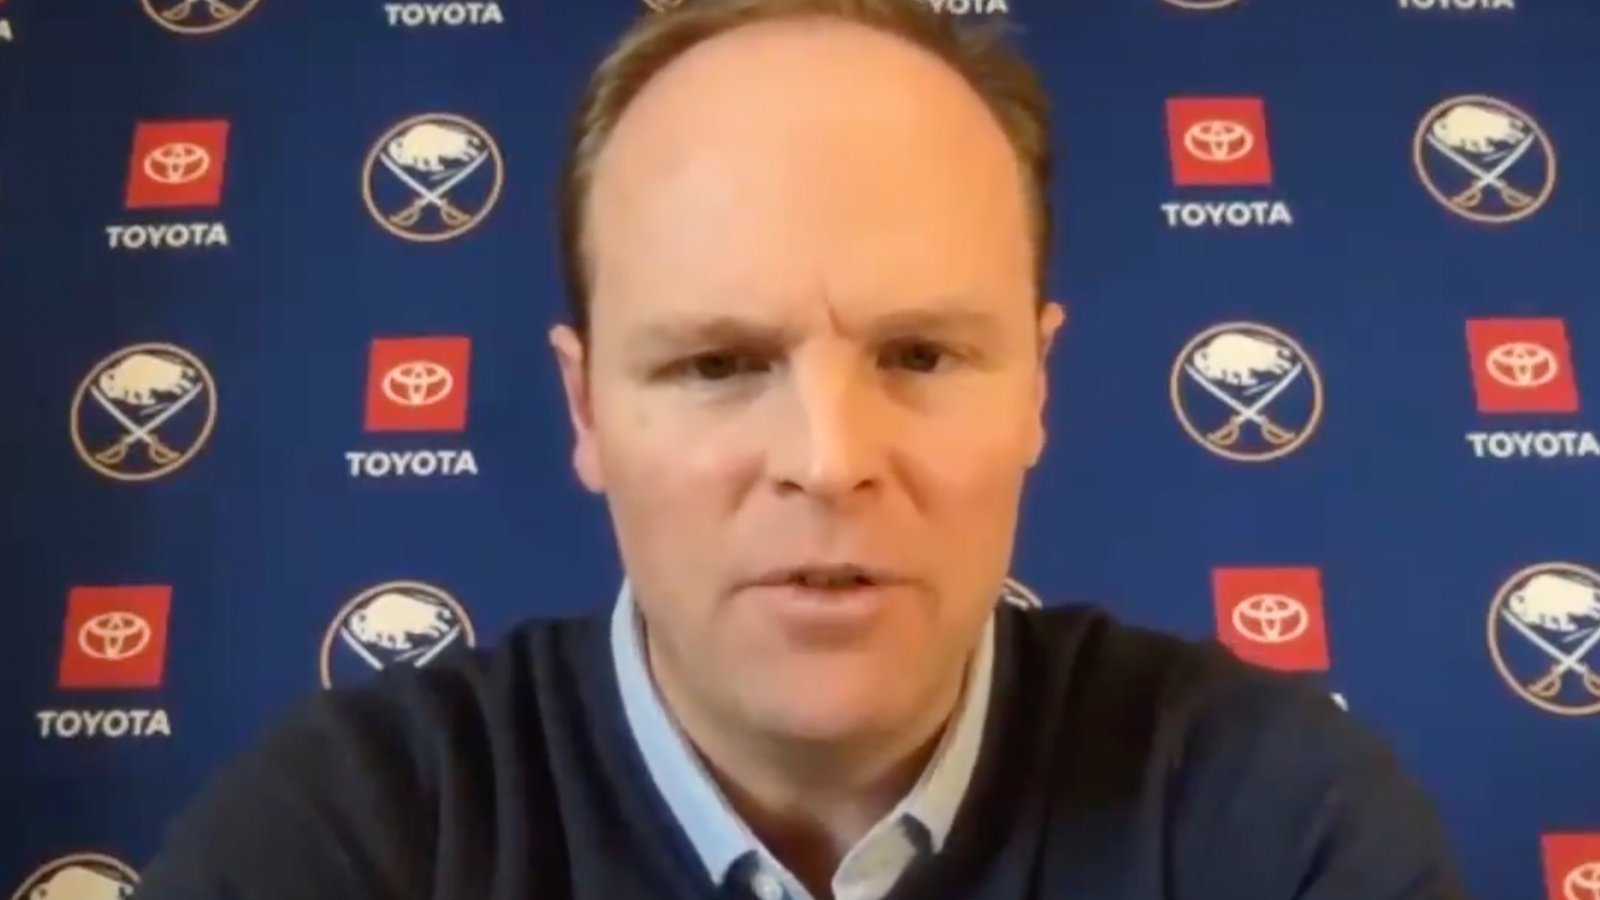 Sabres players and coach get ripped to shreds in live press conference